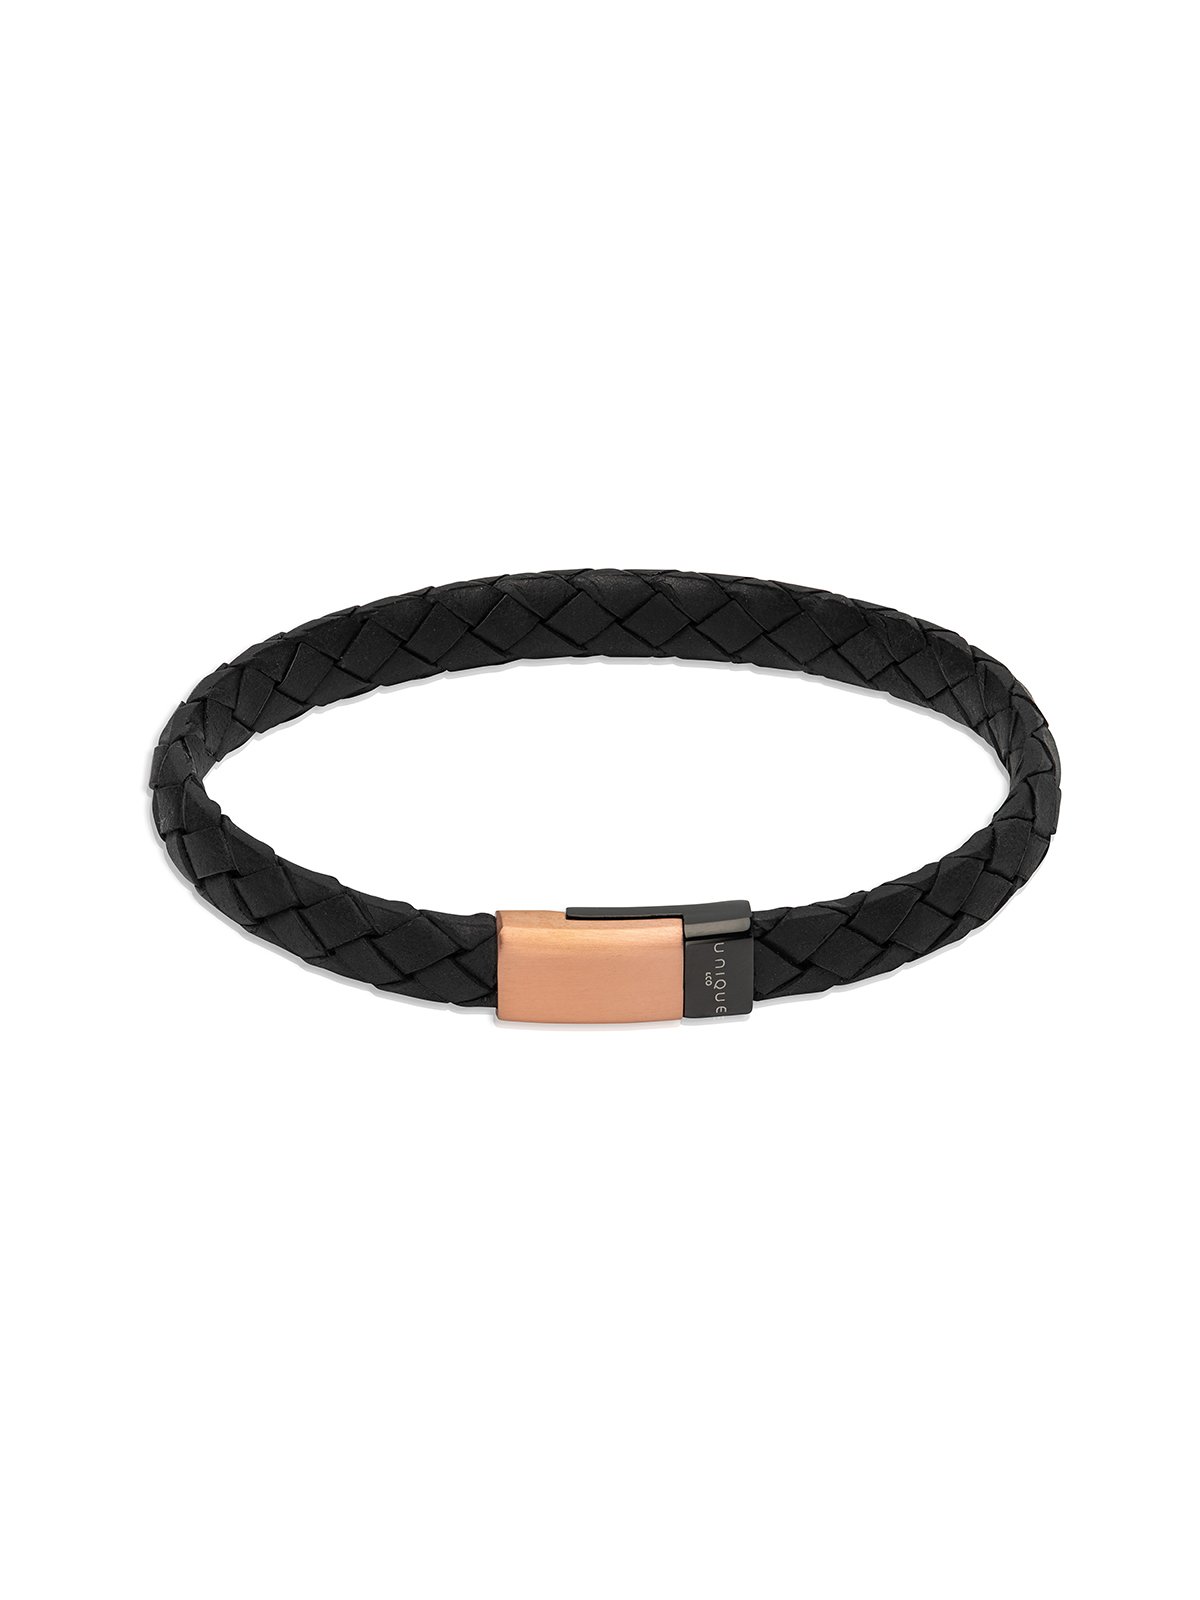 Unique & Co. 21cm Black Leather Bracelet with Rose Gold Plated Steel Clasp